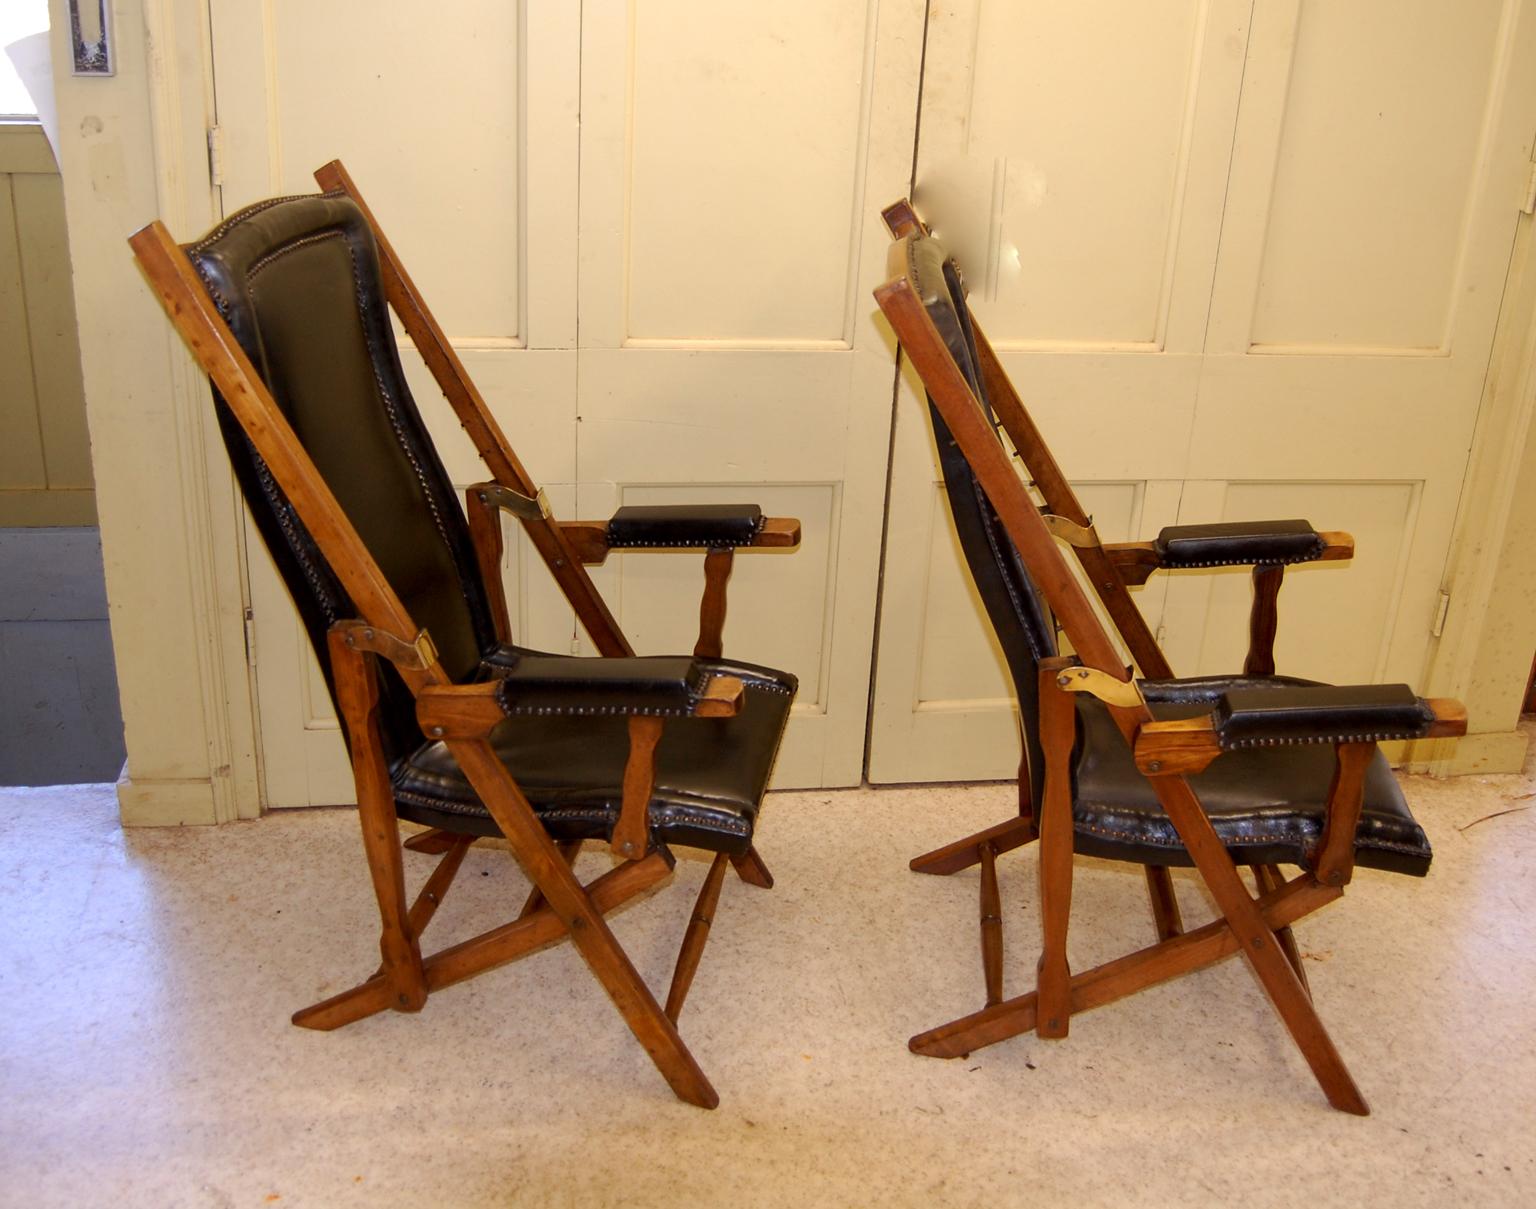 English pair of walnut campaign or deck chairs upholstered in black leather with adjustable backs. These folding chairs are adjustable so they can be as pictured or in increments can go to almost flat. They adjust in small increments via an